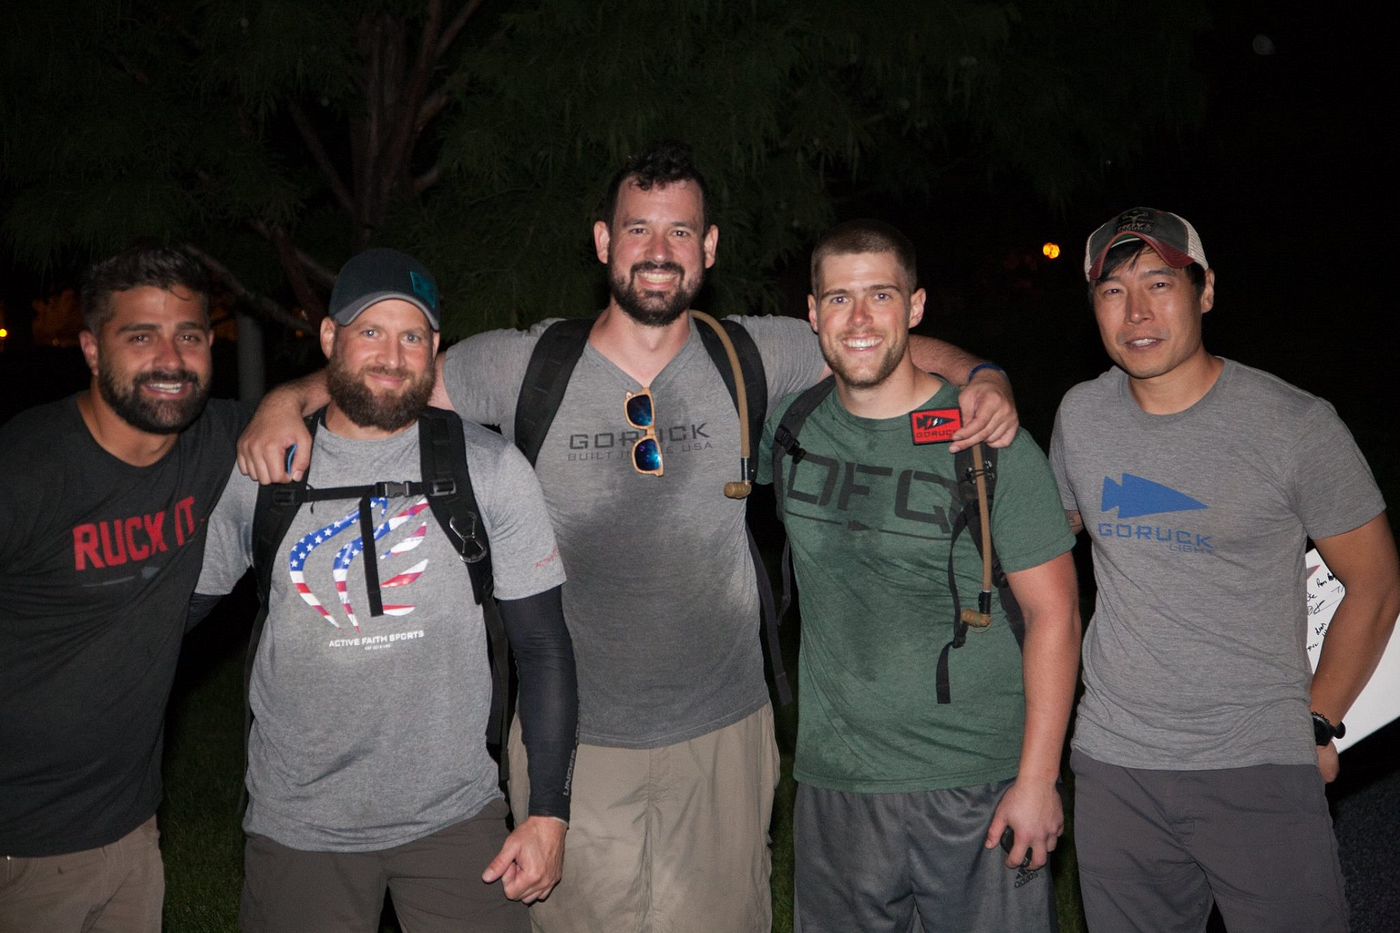 Reflections On Completing The GoRuck HTL